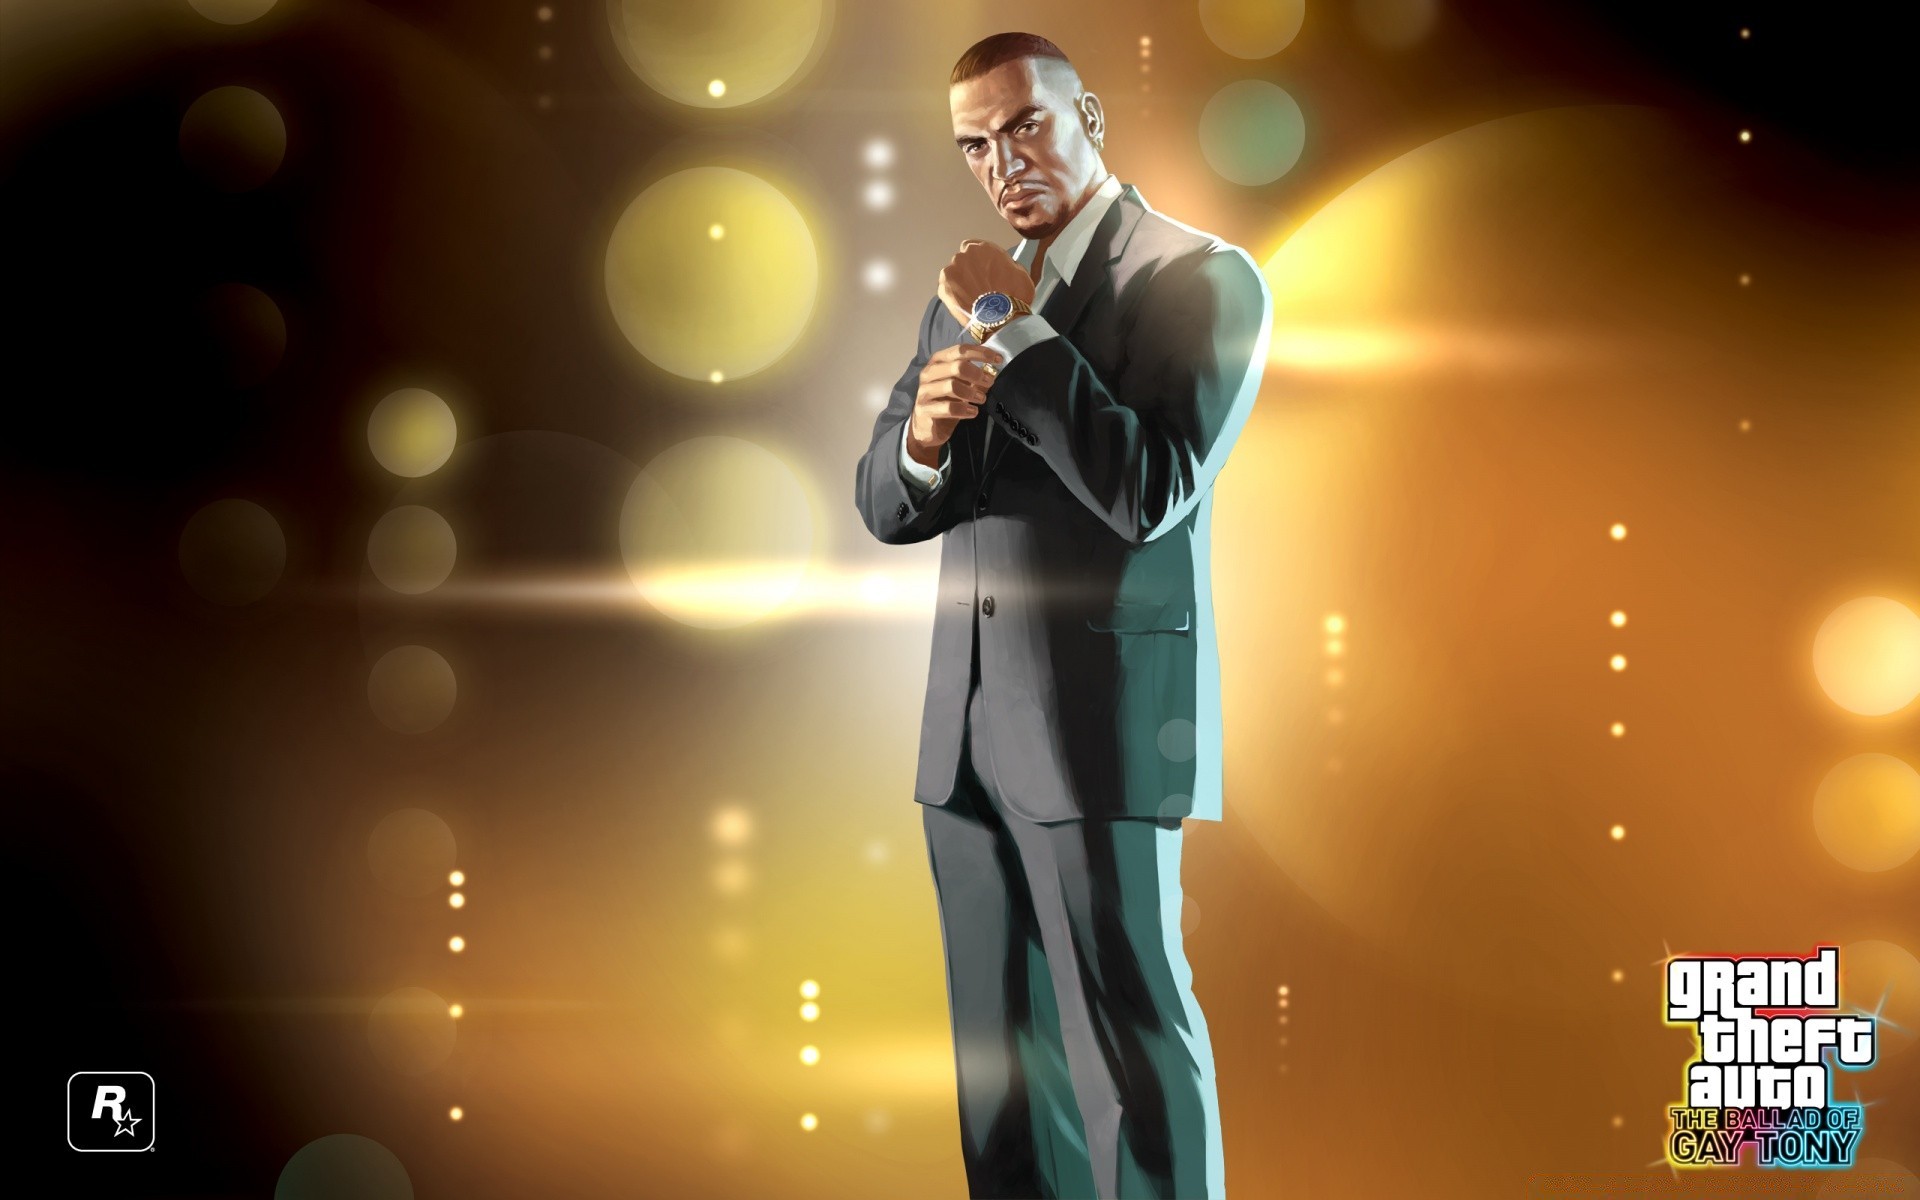 Grand Theft Auto Business Man Illuminated Music Contemporary - 4 Episodes From Liberty City - HD Wallpaper 